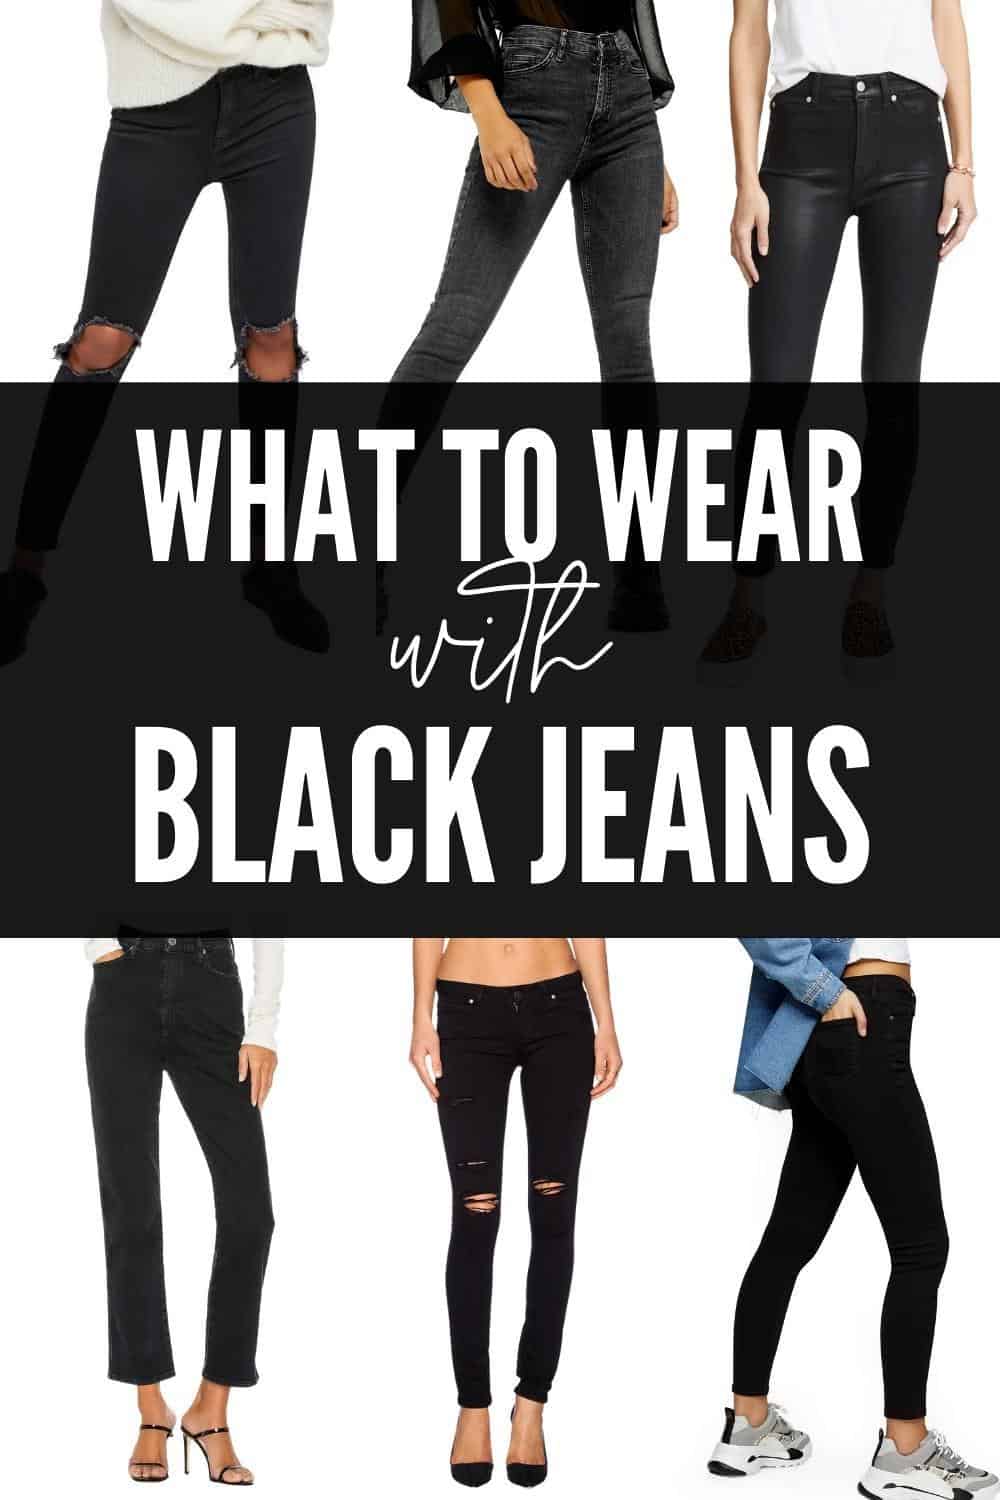 What to Wear with Black Jeans: 16 Black Jeans Outfit Ideas